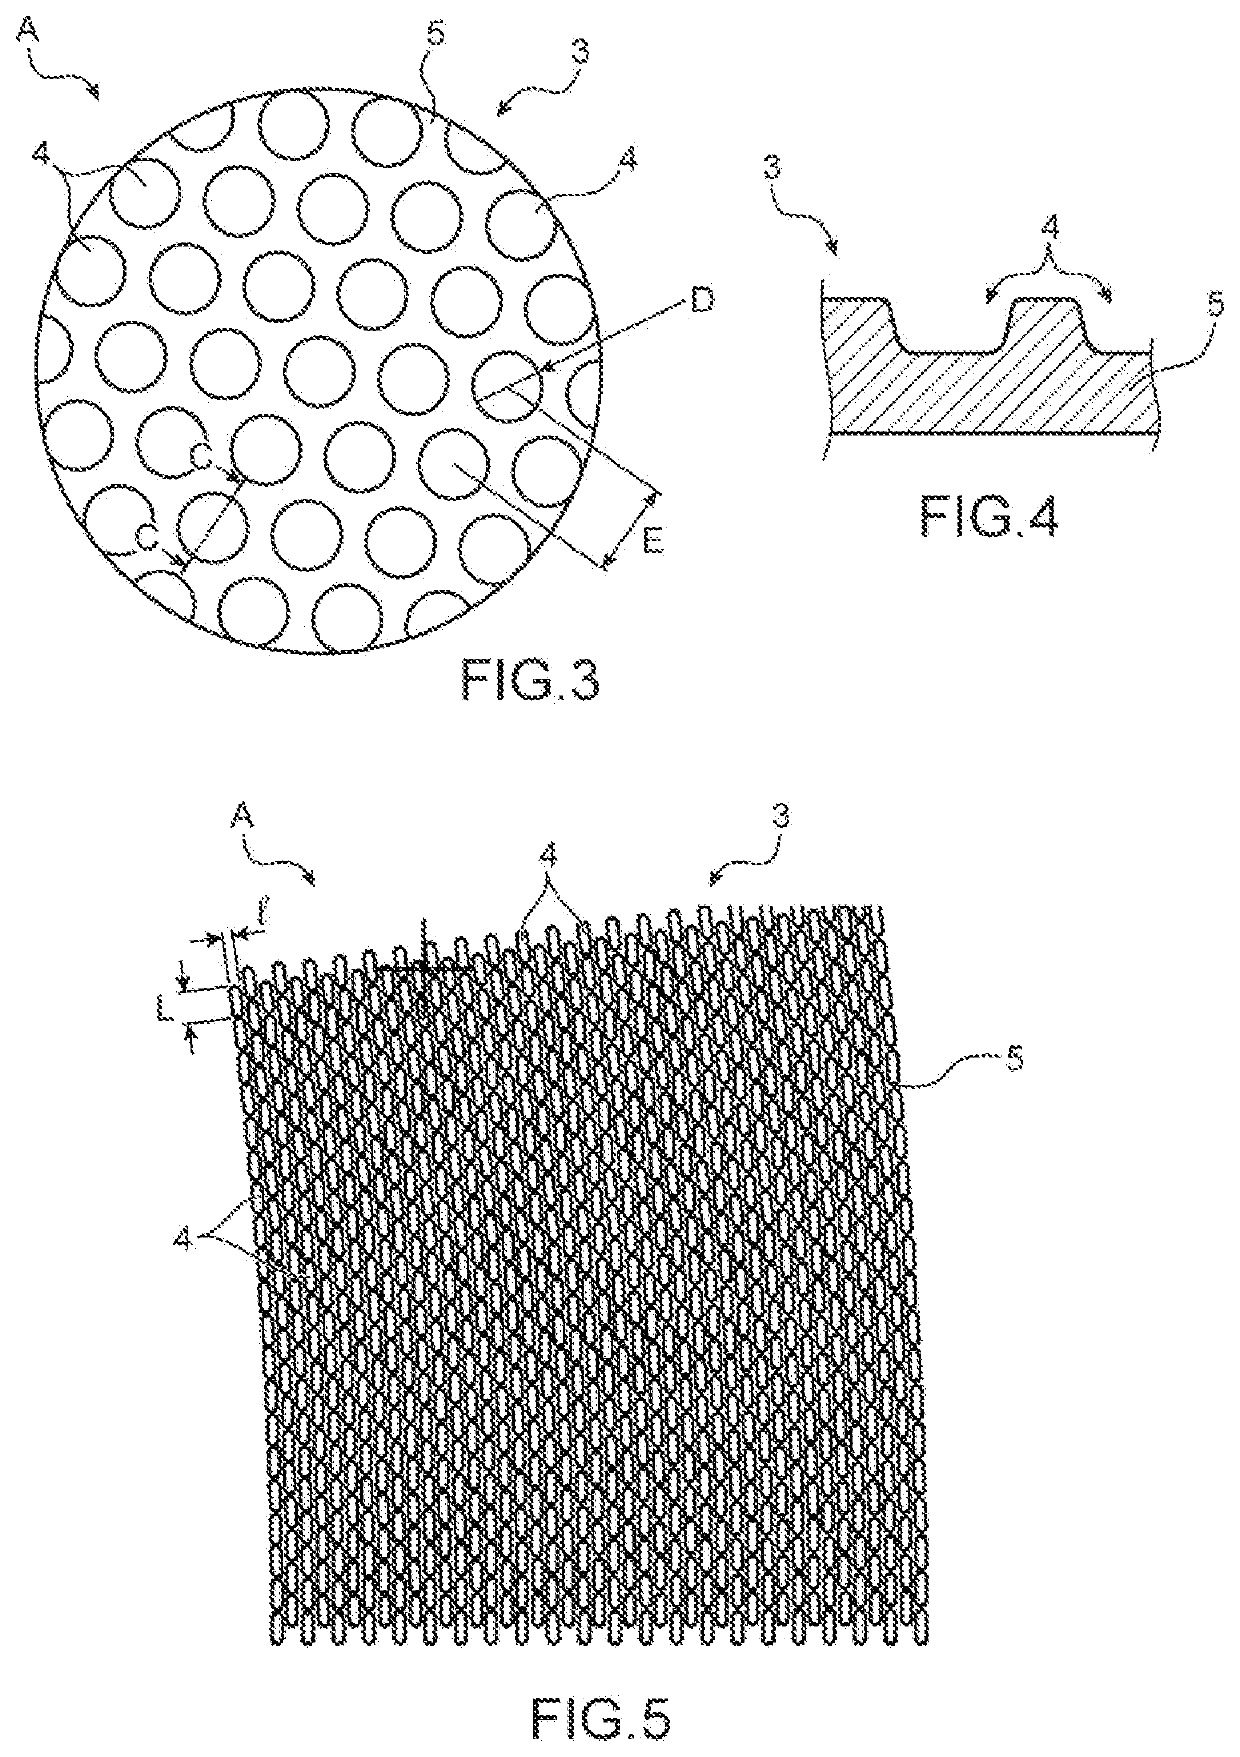 Metal seal comprising a textured outer sealing layer